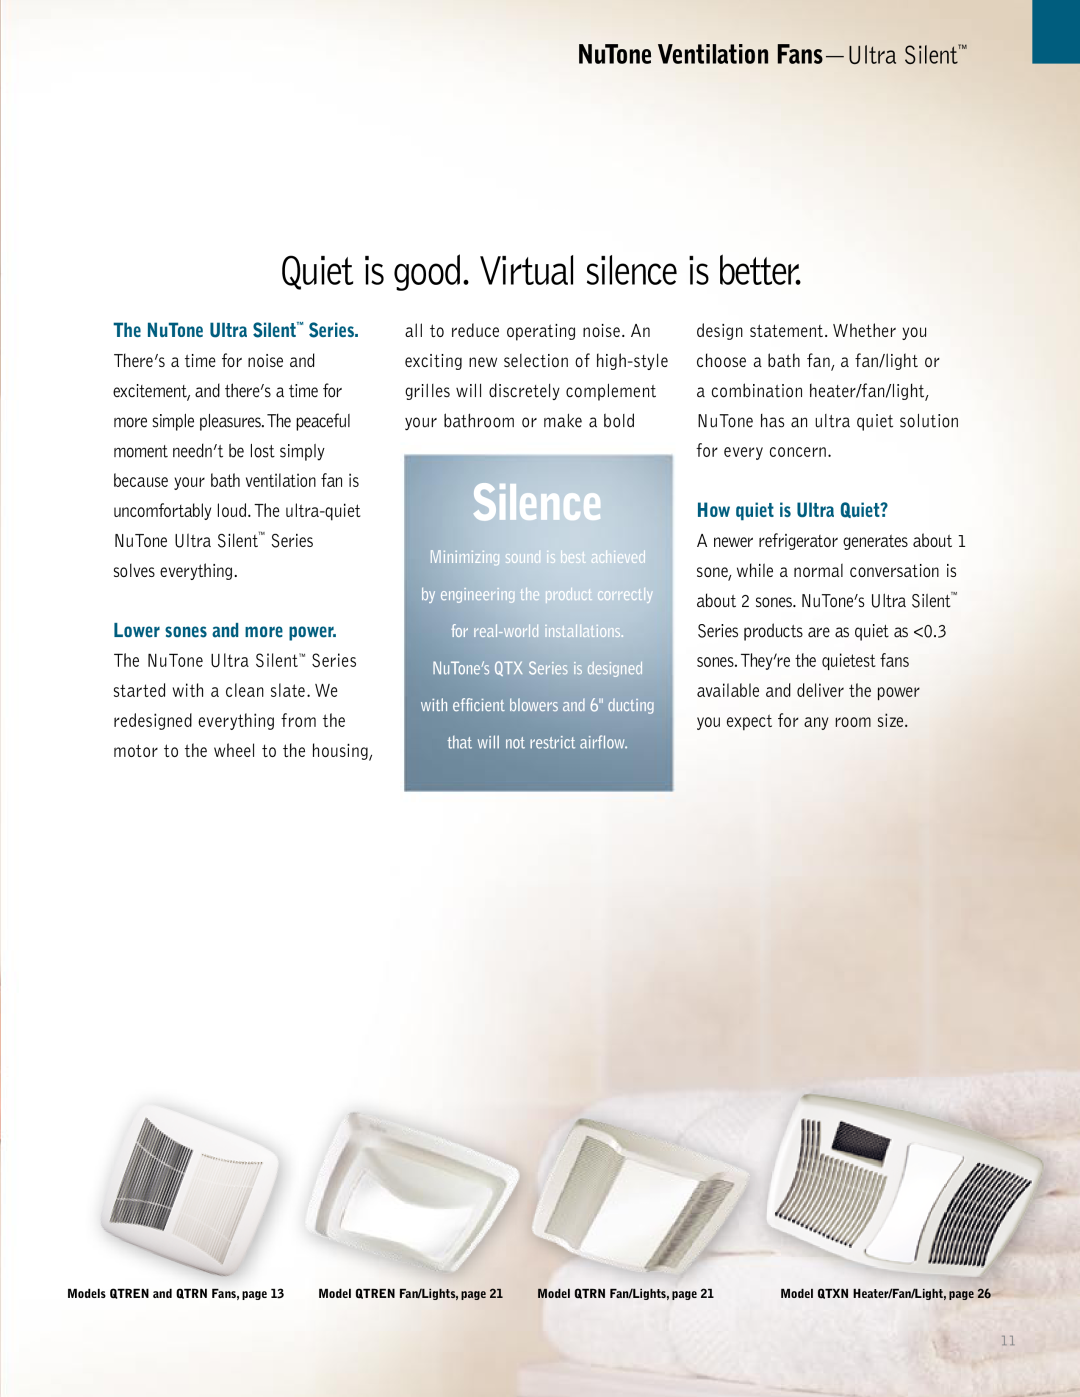 NuTone QTXEN Silence, Quiet is good. Virtual silence is better, Lower sones and more power, How quiet is Ultra Quiet? 